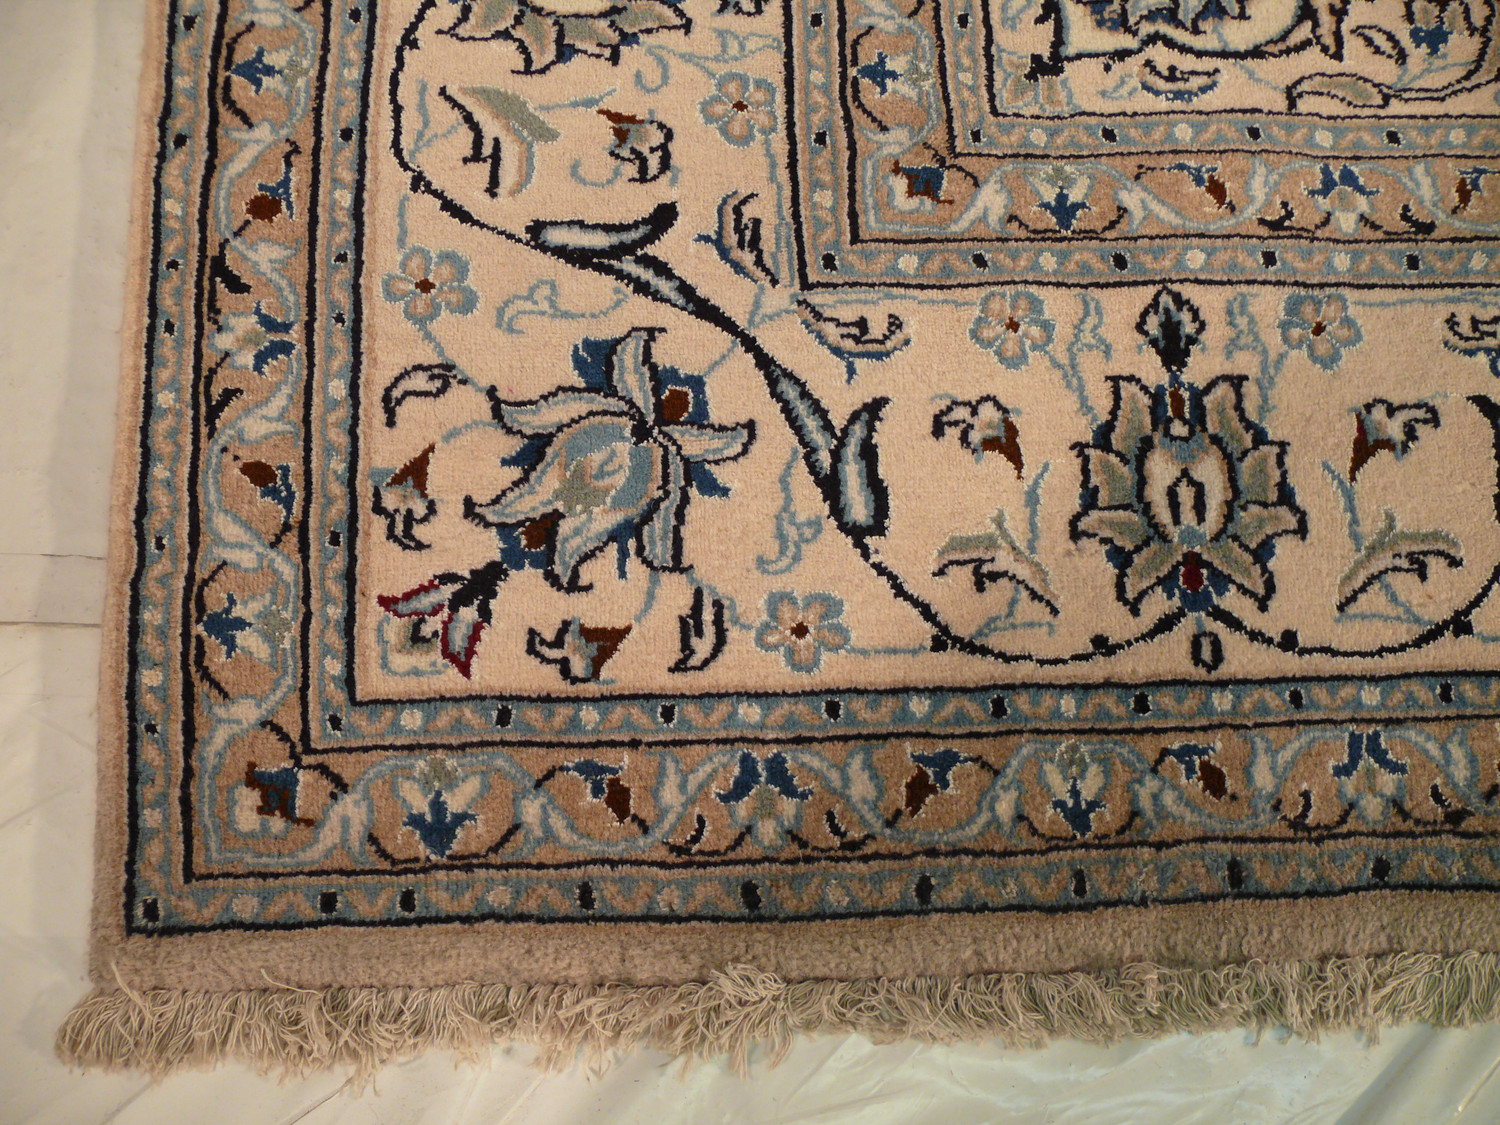 This picture features a stunning Persian Nain wool and silk rug, showcasing its intricate border design. Measuring in at a size that is sure to impress, this rug adds elegance and sophistication to any room in your home. The exceptional quality and craftsmanship of this rug are highlighted in the image, making it a statement piece that is sure to be admired by all who see it.